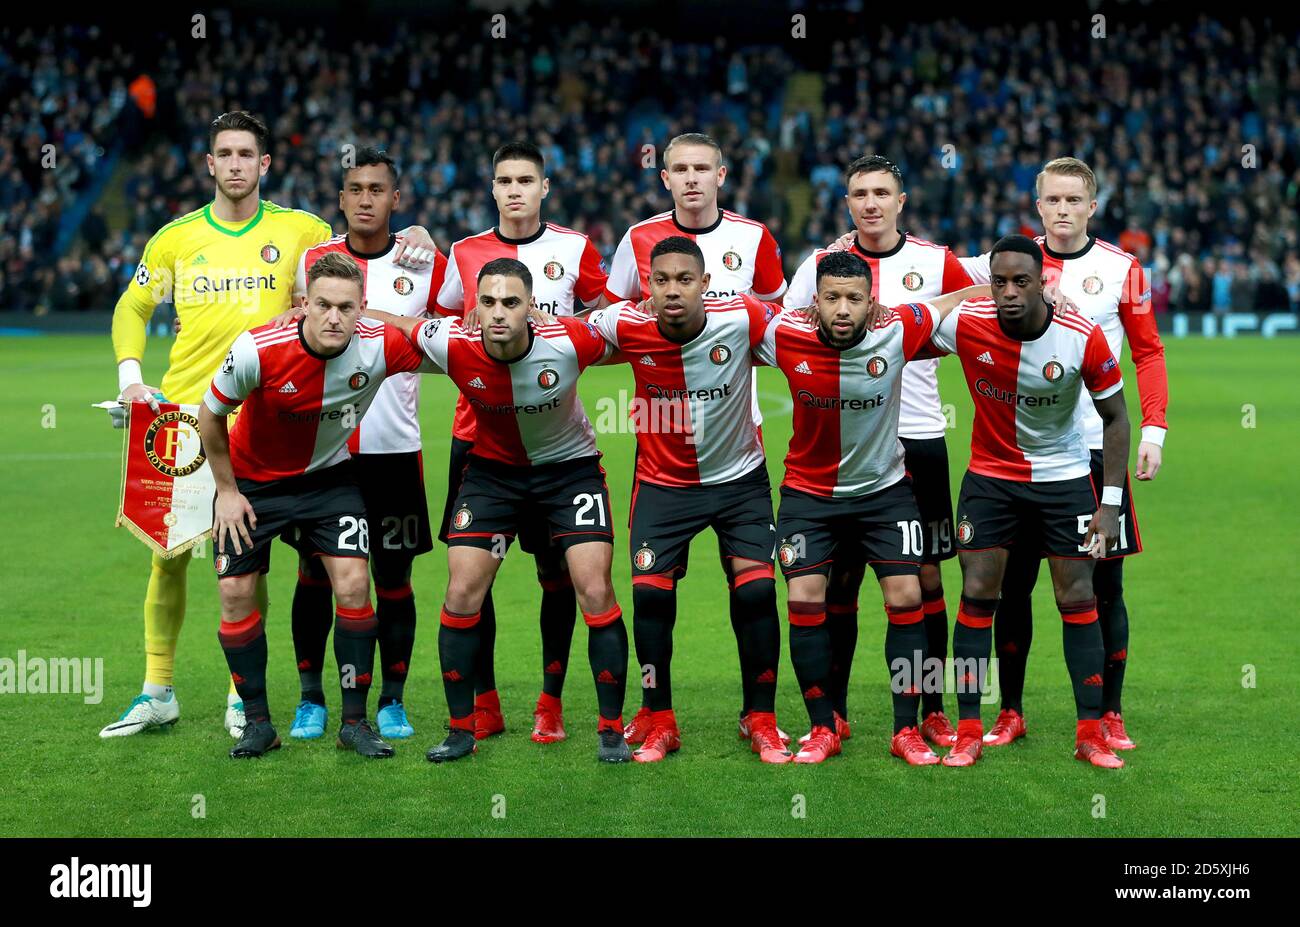 Feyenoord players pose for a photograph before kick-off Stock Photo